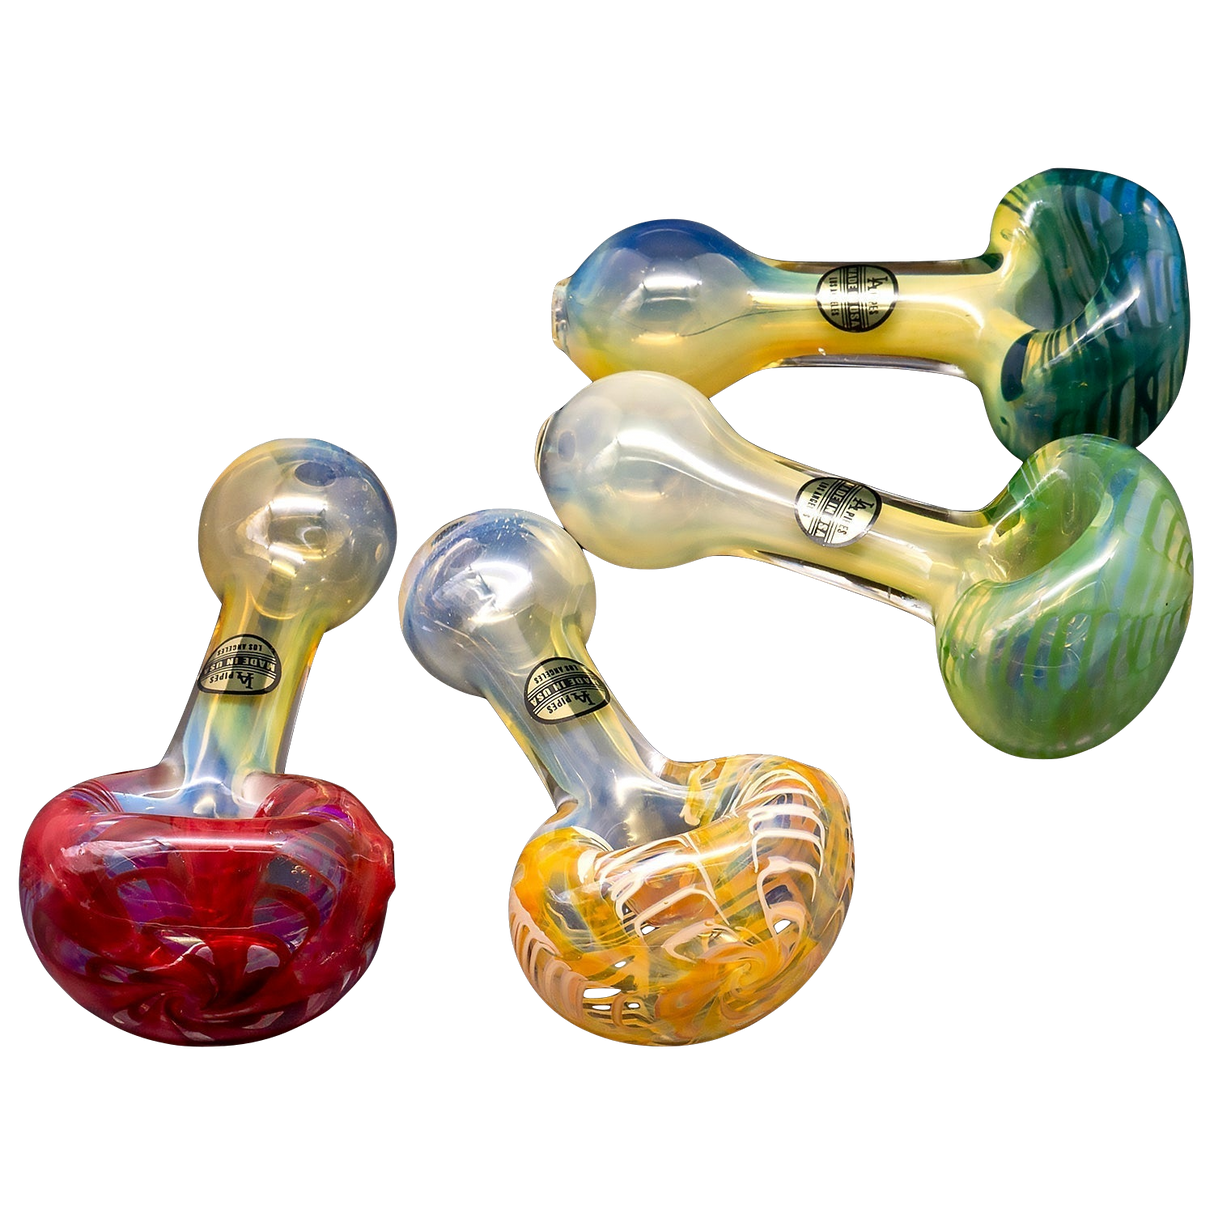 LA Pipes hand-pipes with color changing design and borosilicate glass, side view on white background